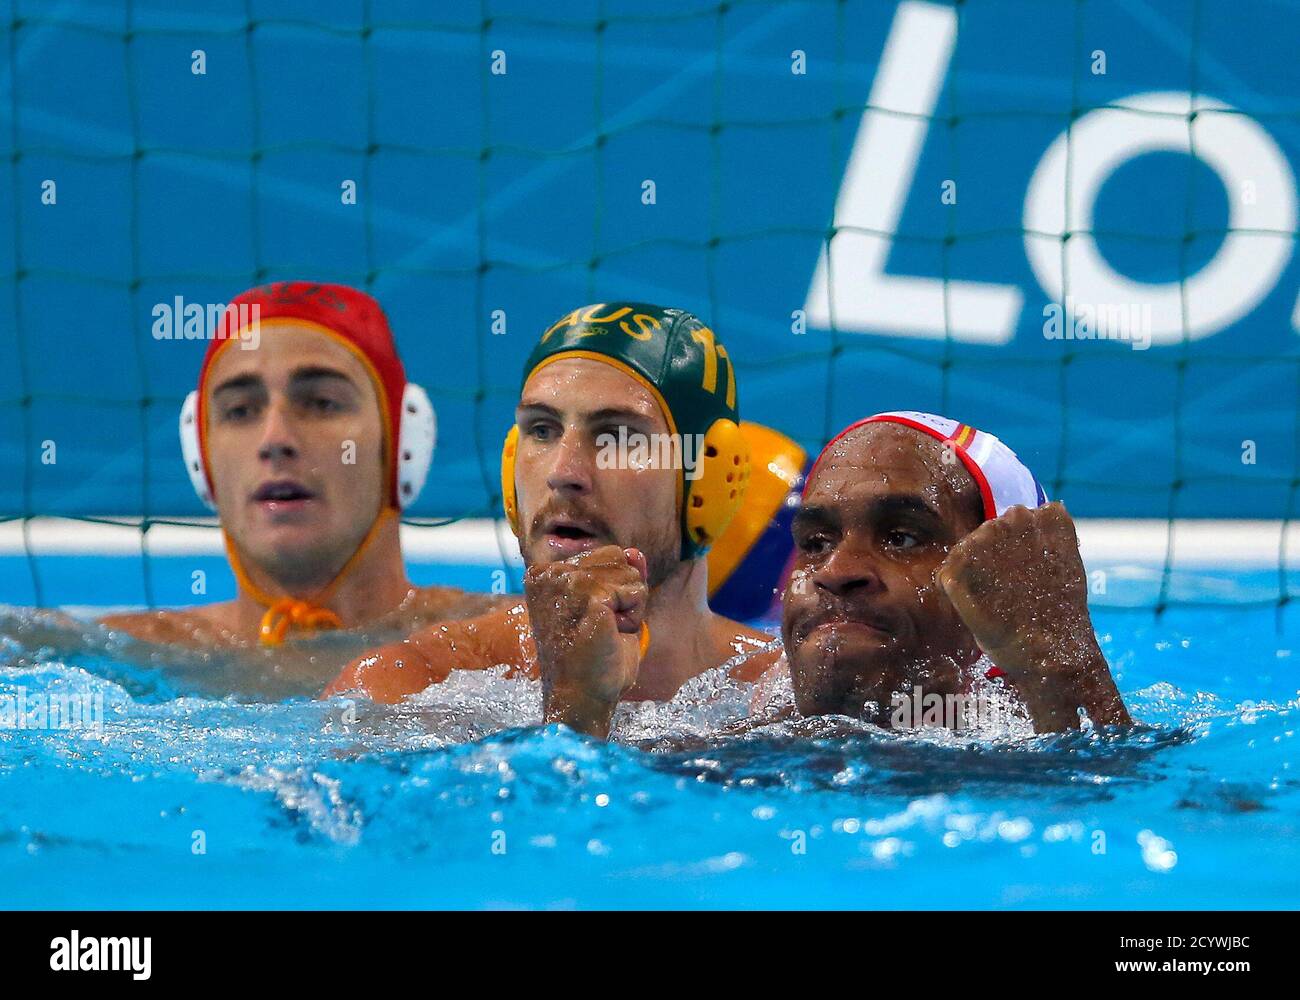 Spain's Ivan Perez Vargas (R) celebrates a goal past Australia's goalkeeper  James Clark (L) and Rhys Howden during their men's preliminary round Group  A water polo match at the London 2012 Olympic